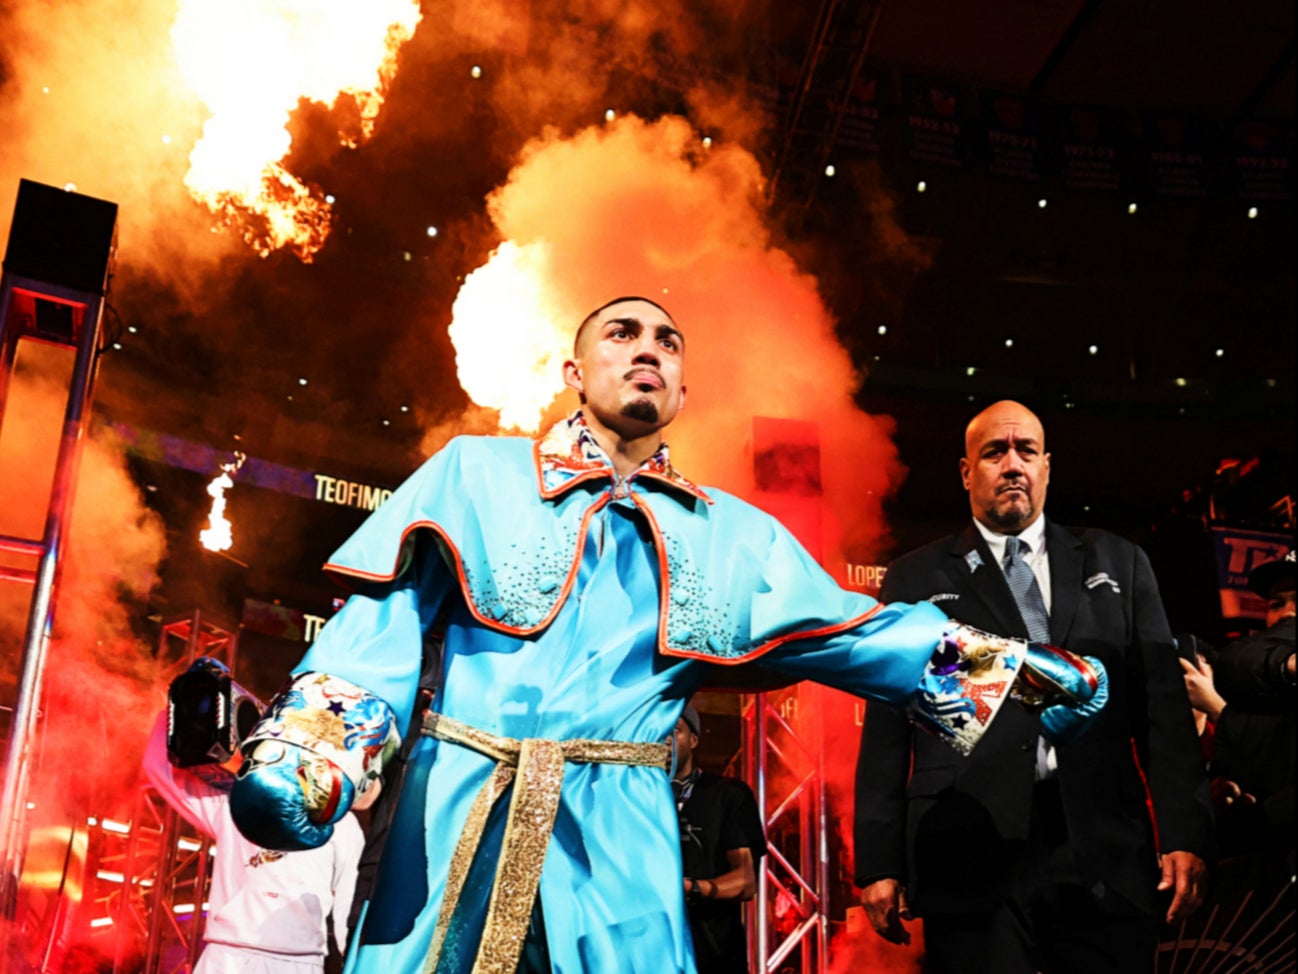 Teofimo Lopez has become an increasingly divisive figure in boxing in recent years